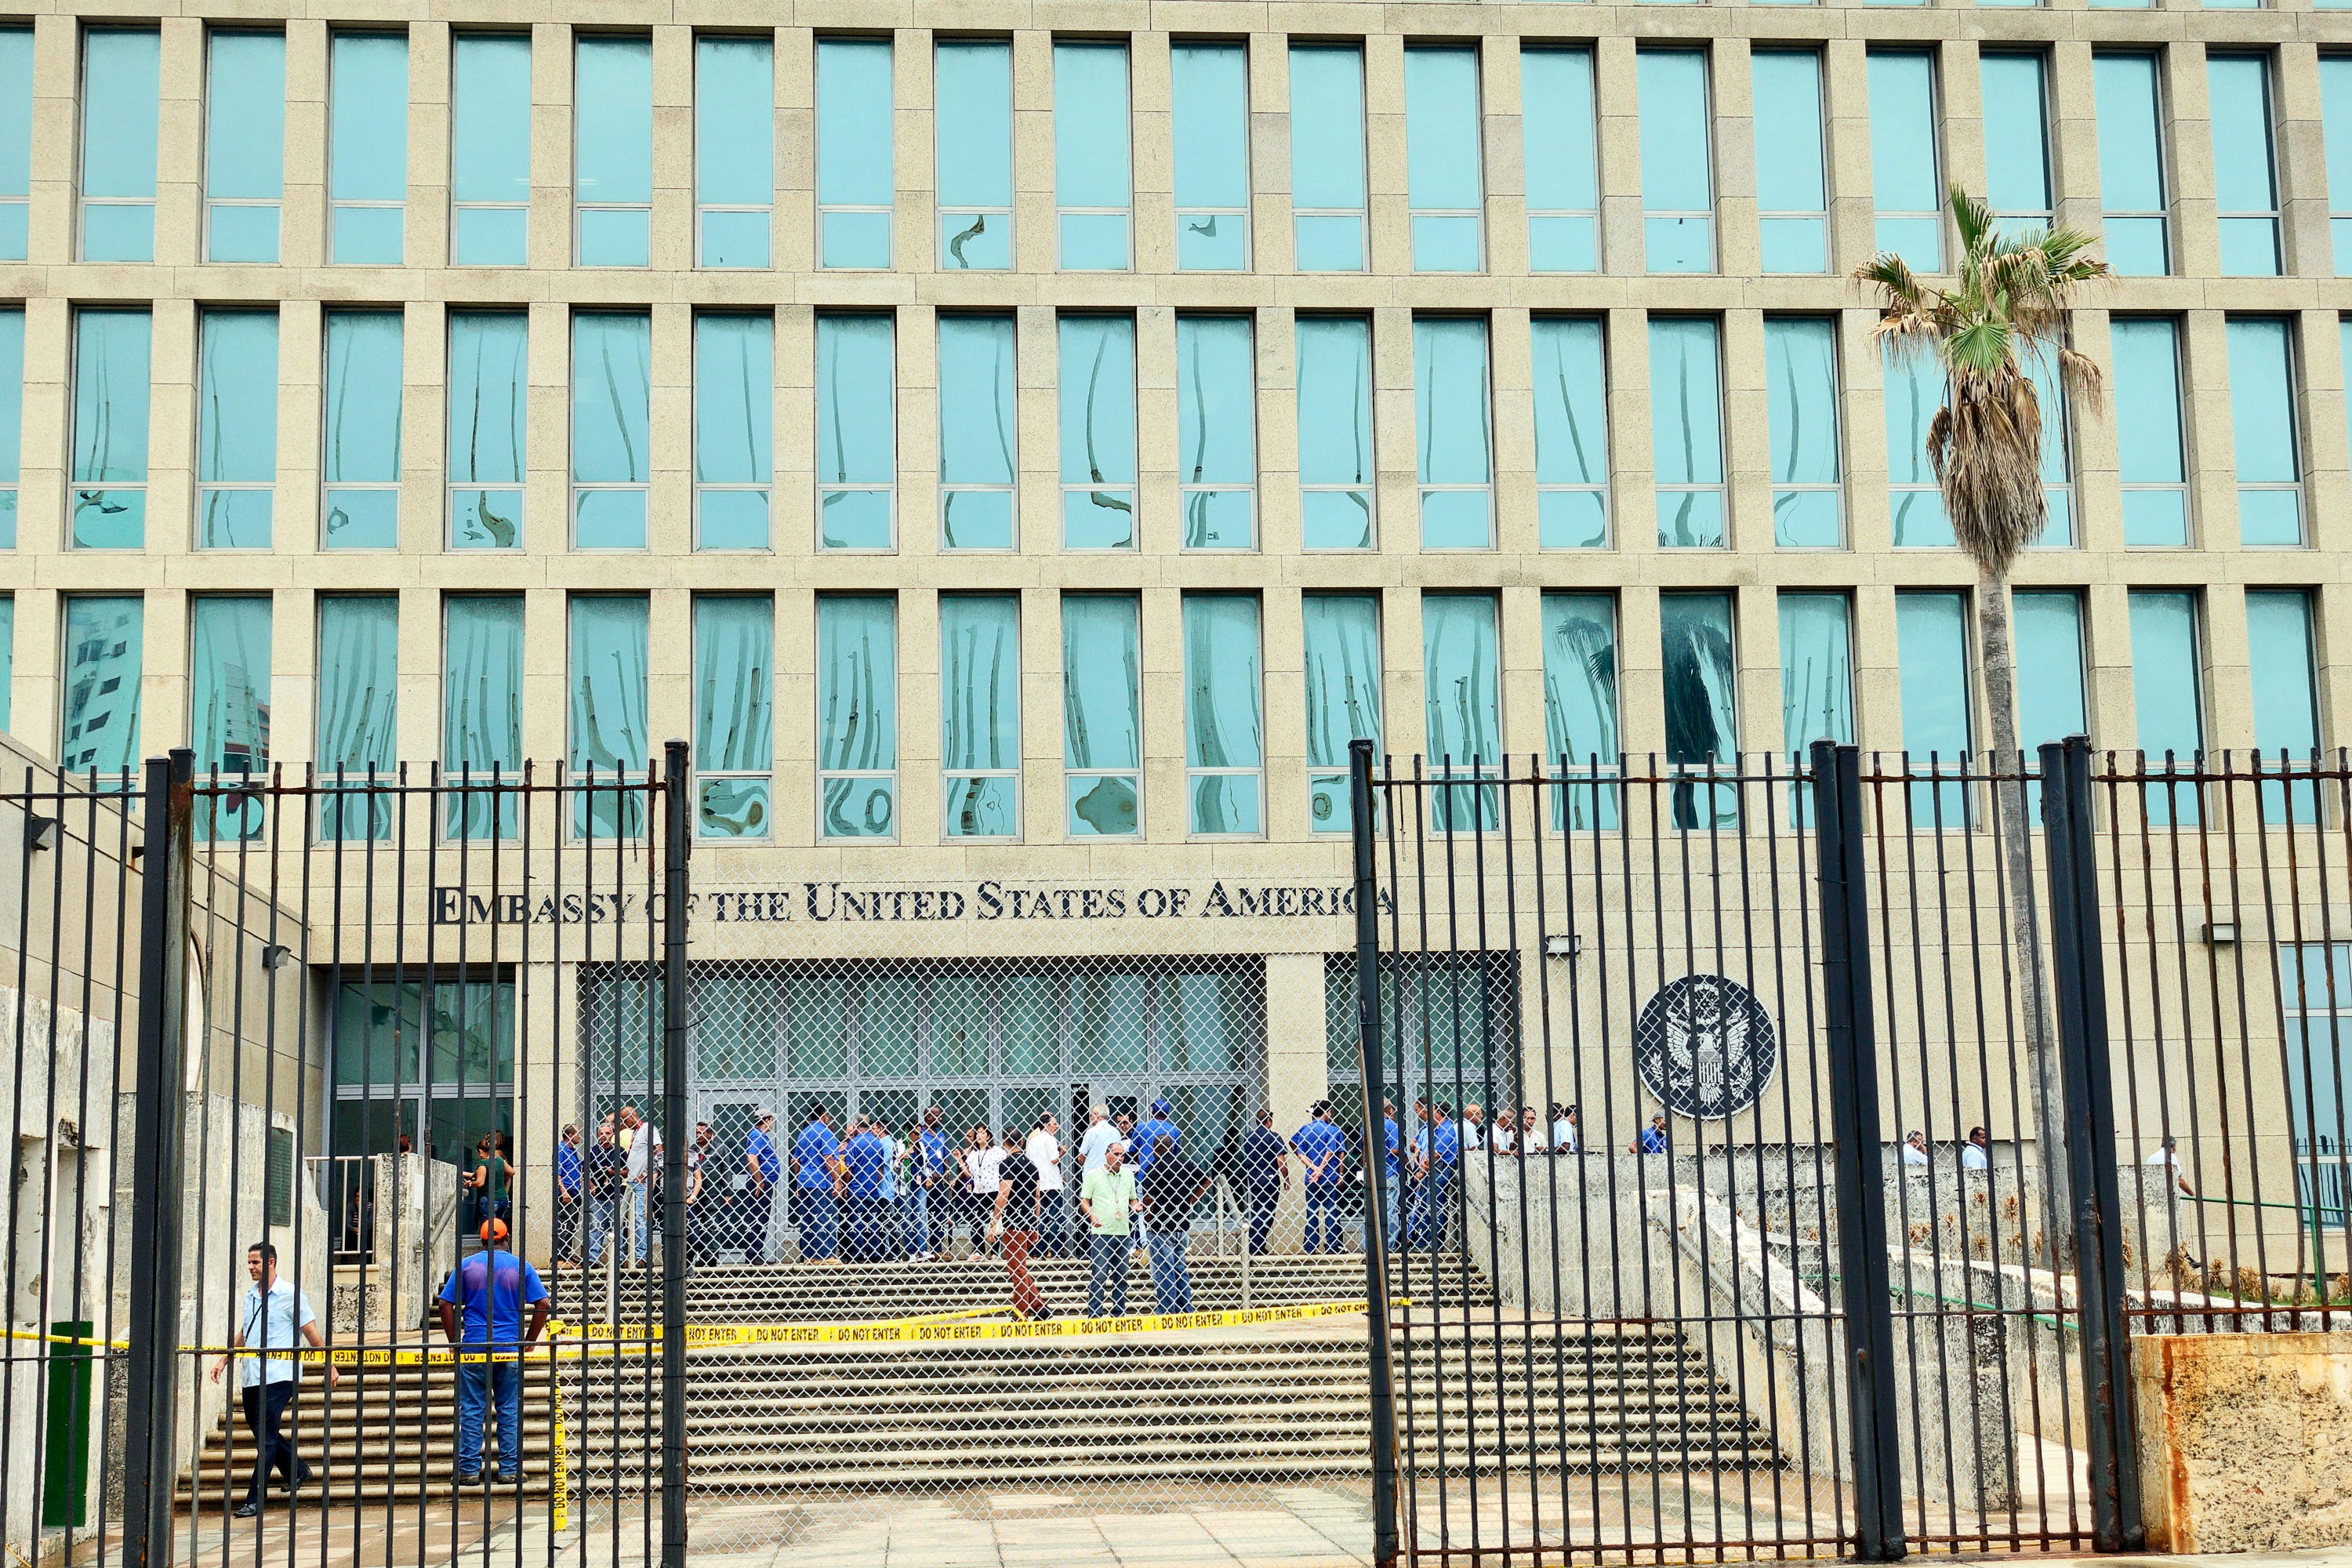 A view of personnel in front of the entrance to the U.S. Embassy in Havana, Cuba, looking through an open black metal bar security gate, chain link fence, and caution tape